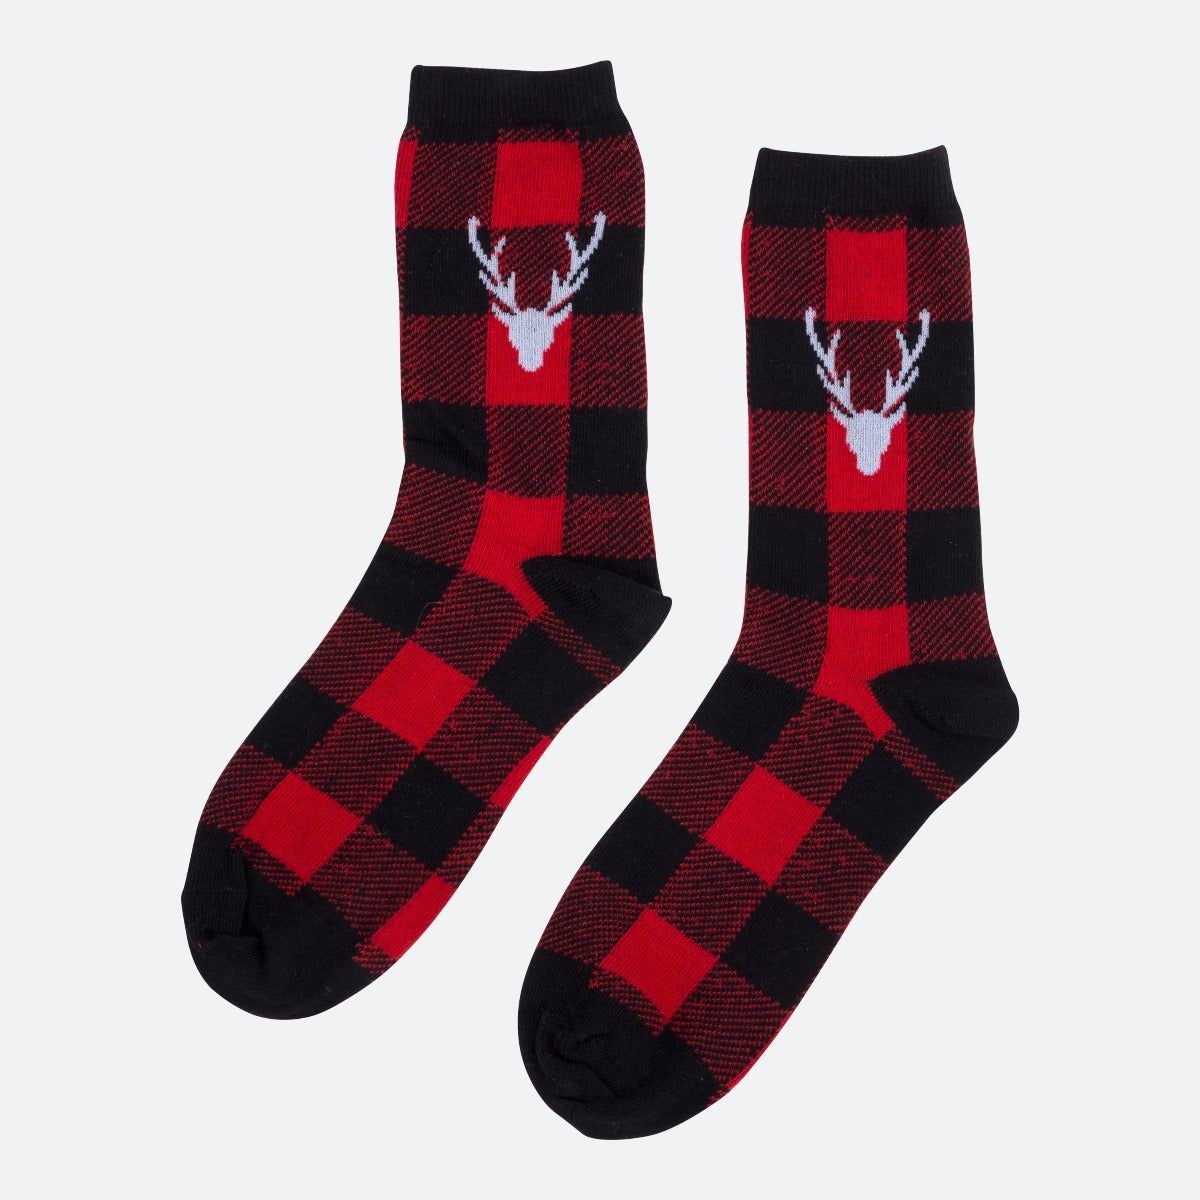 Socks with black and red plaid and deer print